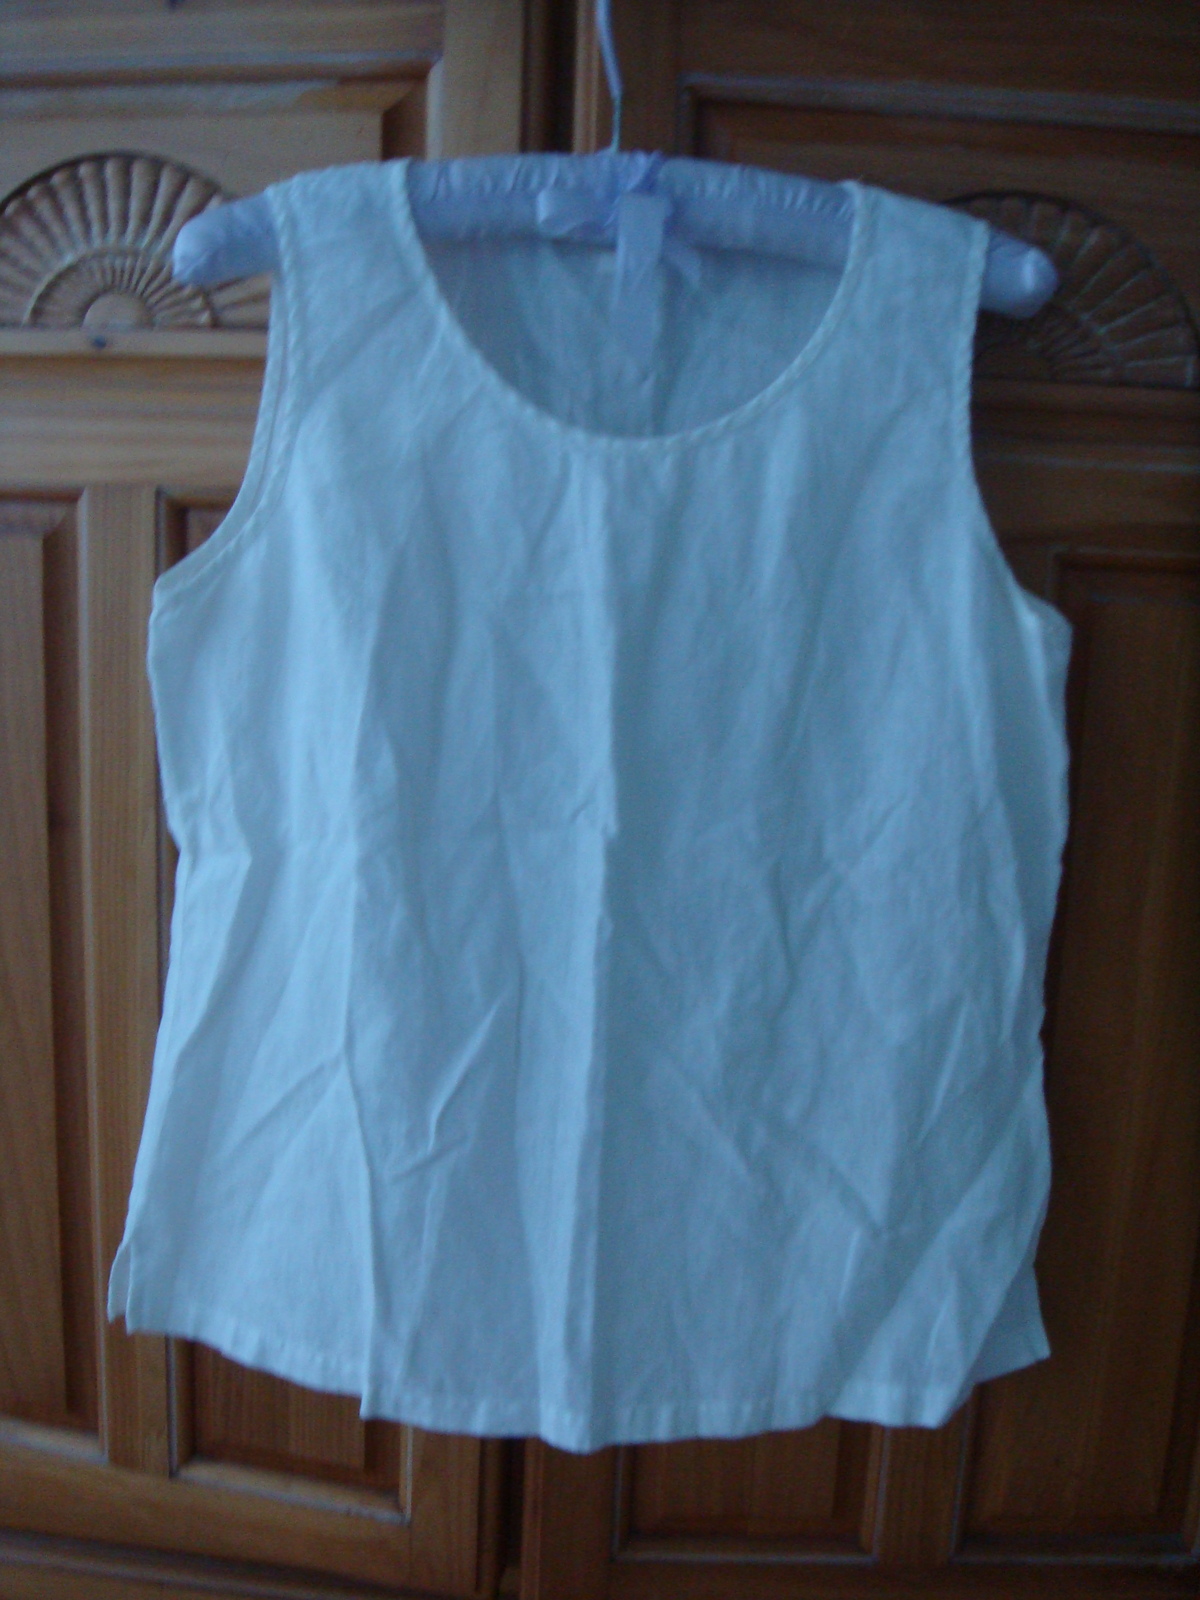 Primary image for Womens Sleeveless White Blouse Size Medium by 120% Hno